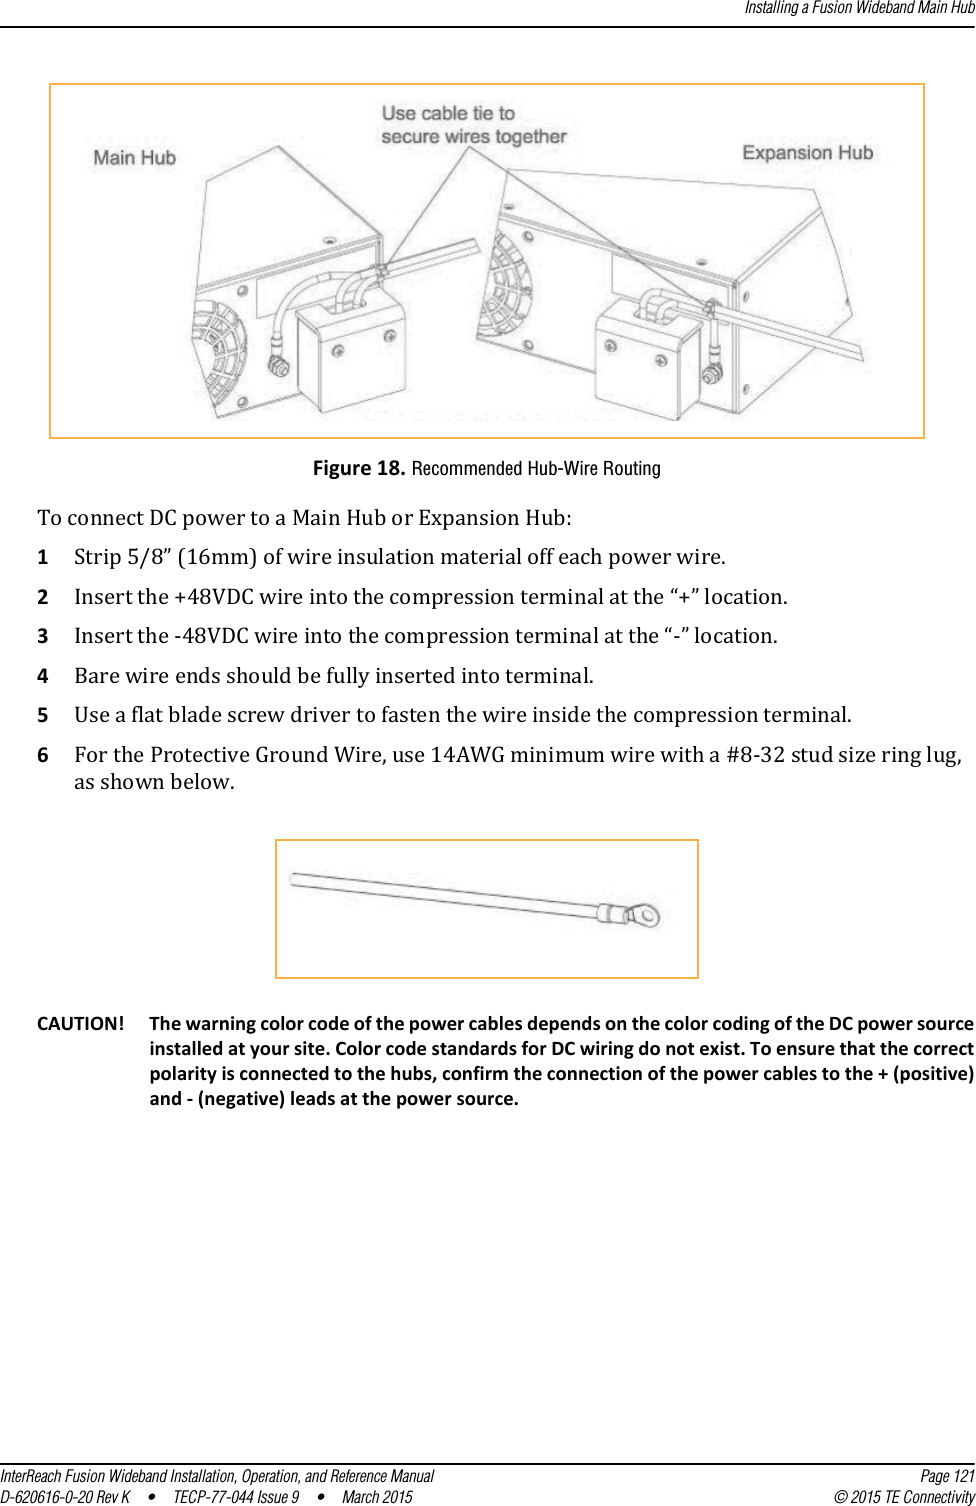 Installing a Fusion Wideband Main HubInterReach Fusion Wideband Installation, Operation, and Reference Manual Page 121D-620616-0-20 Rev K  •  TECP-77-044 Issue 9  •  March 2015 © 2015 TE ConnectivityFigure 18. Recommended Hub-Wire RoutingTo connect DC power to a Main Hub or Expansion Hub:1Strip 5/8” (16mm) of wire insulation material off each power wire.2Insert the +48VDC wire into the compression terminal at the “+” location.3Insert the -48VDC wire into the compression terminal at the “-” location.4Bare wire ends should be fully inserted into terminal.5Use a flat blade screw driver to fasten the wire inside the compression terminal.6For the Protective Ground Wire, use 14AWG minimum wire with a #8-32 stud size ring lug, as shown below.CAUTION! The warning color code of the power cables depends on the color coding of the DC power source installed at your site. Color code standards for DC wiring do not exist. To ensure that the correct polarity is connected to the hubs, confirm the connection of the power cables to the + (positive) and - (negative) leads at the power source.